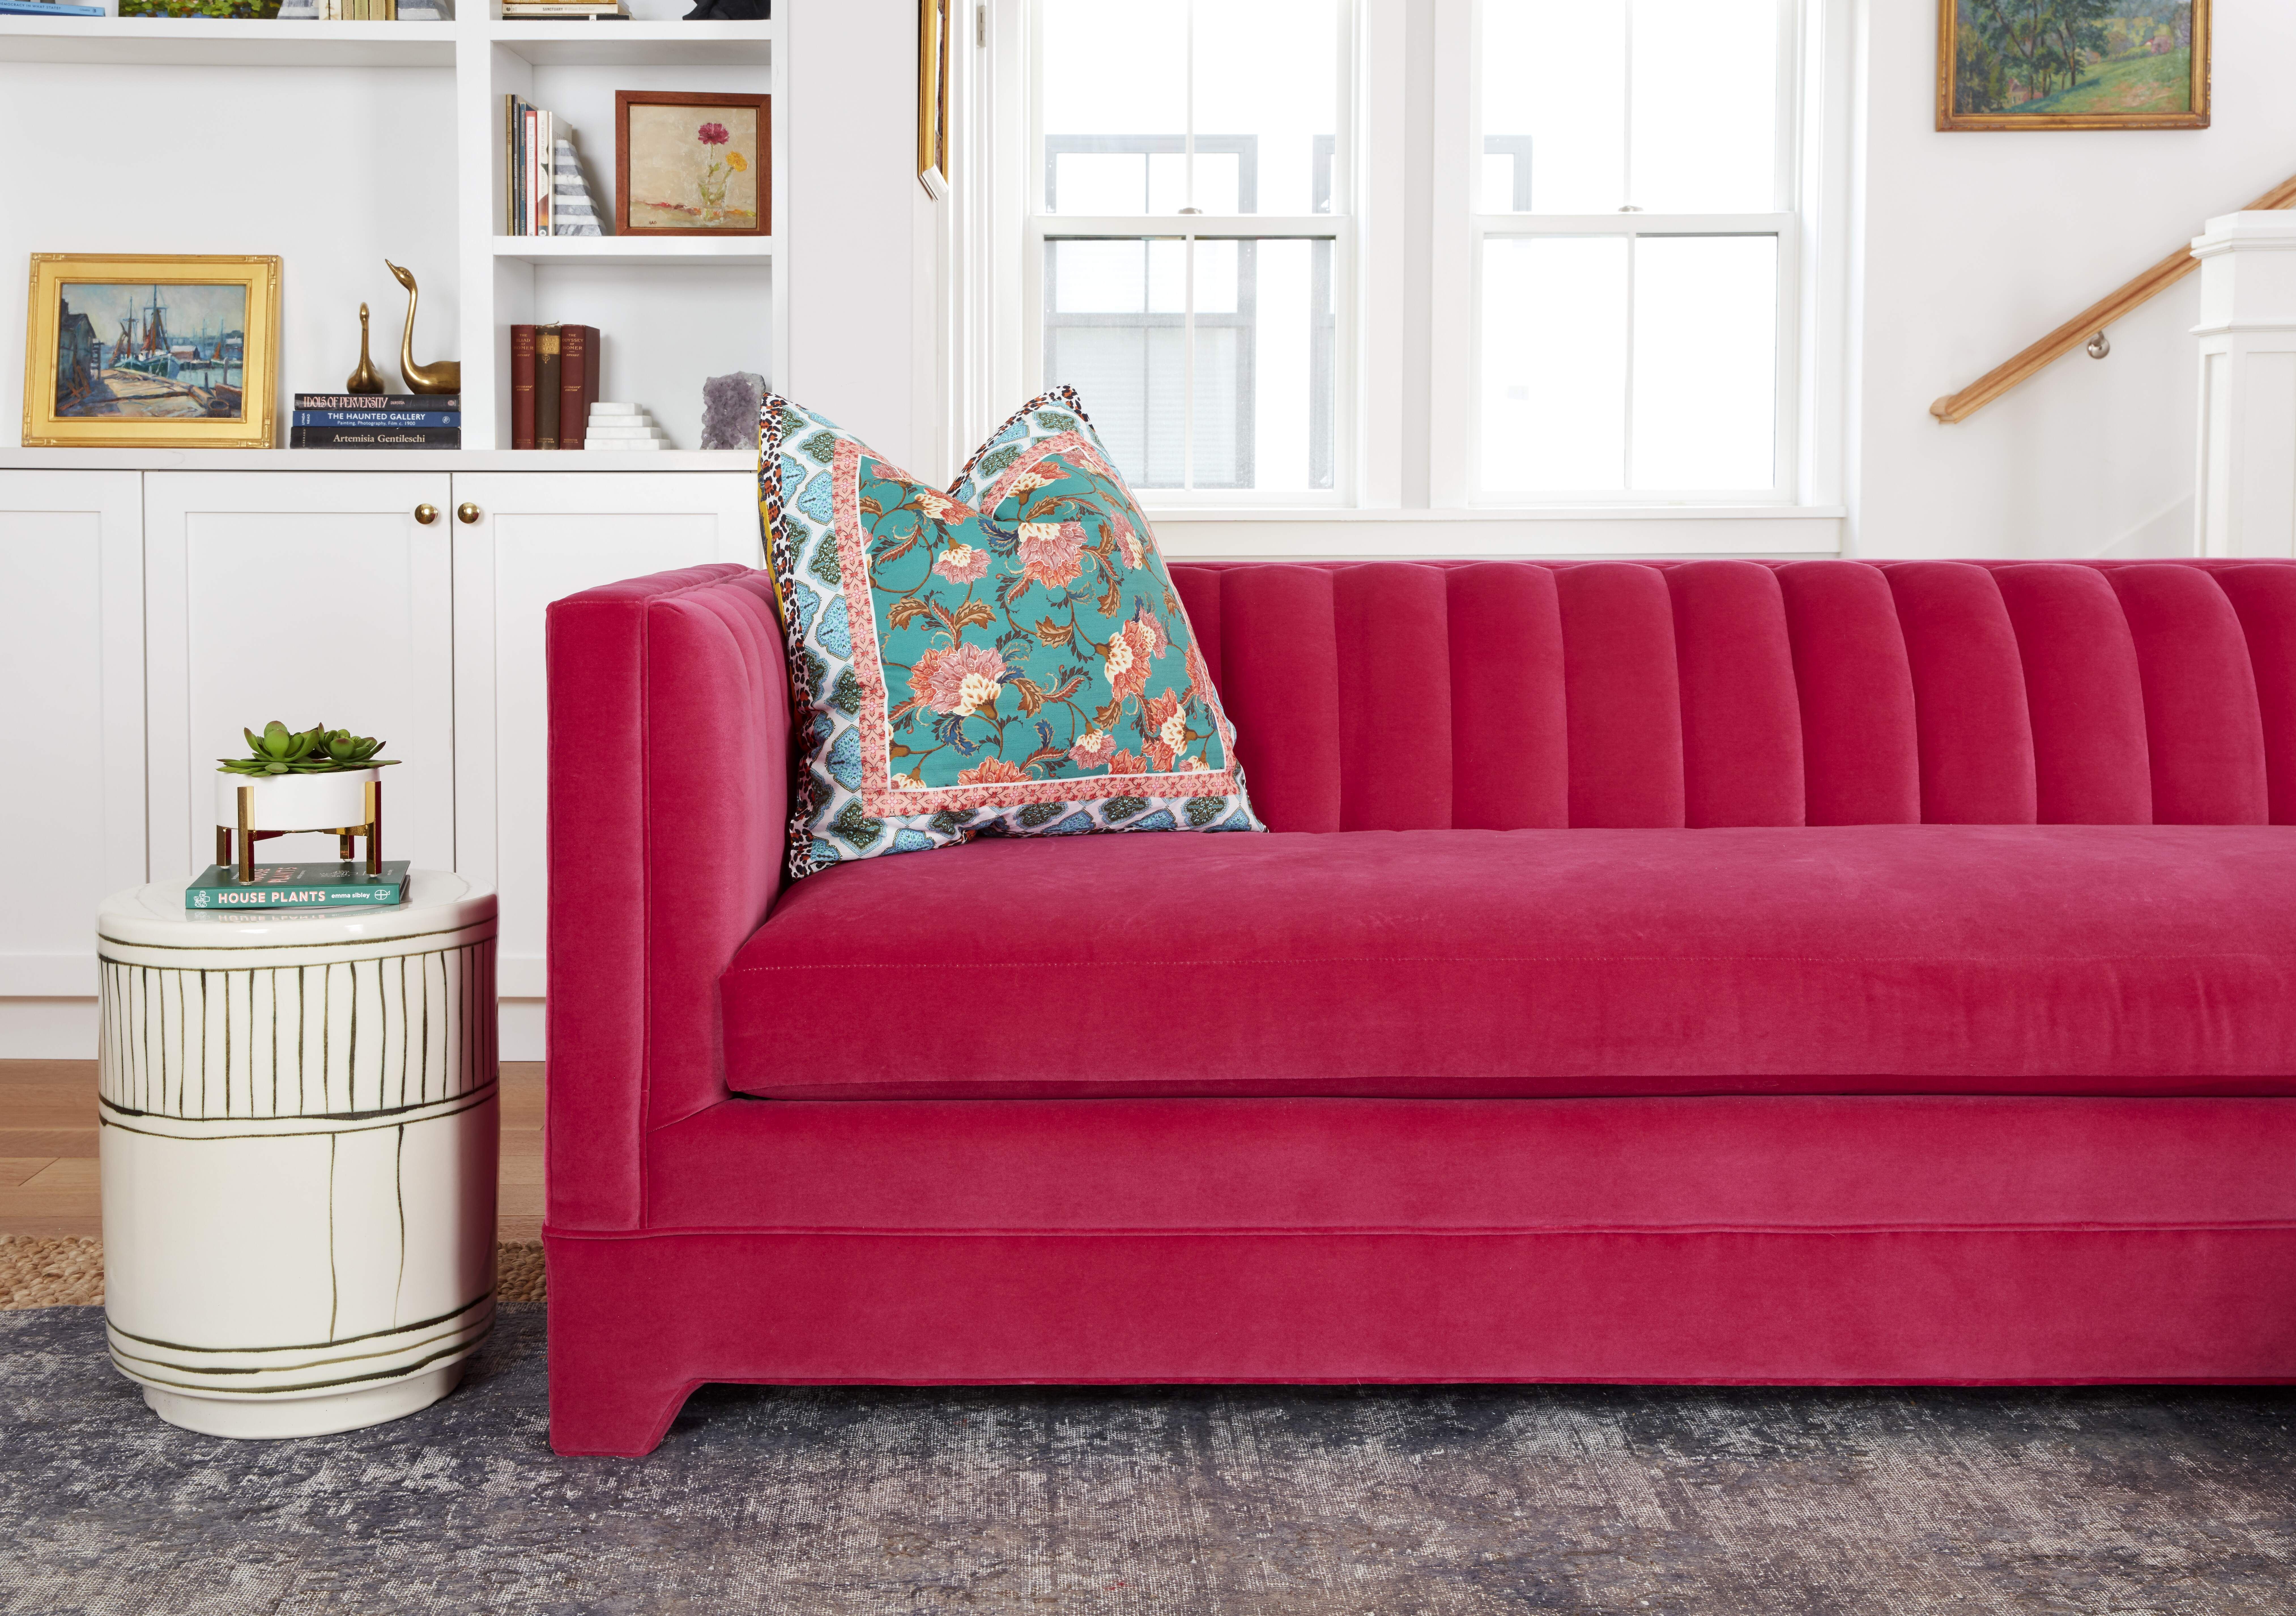 Mice Gage Designs A Family Home, Bright Pink Velvet Sofa Bed